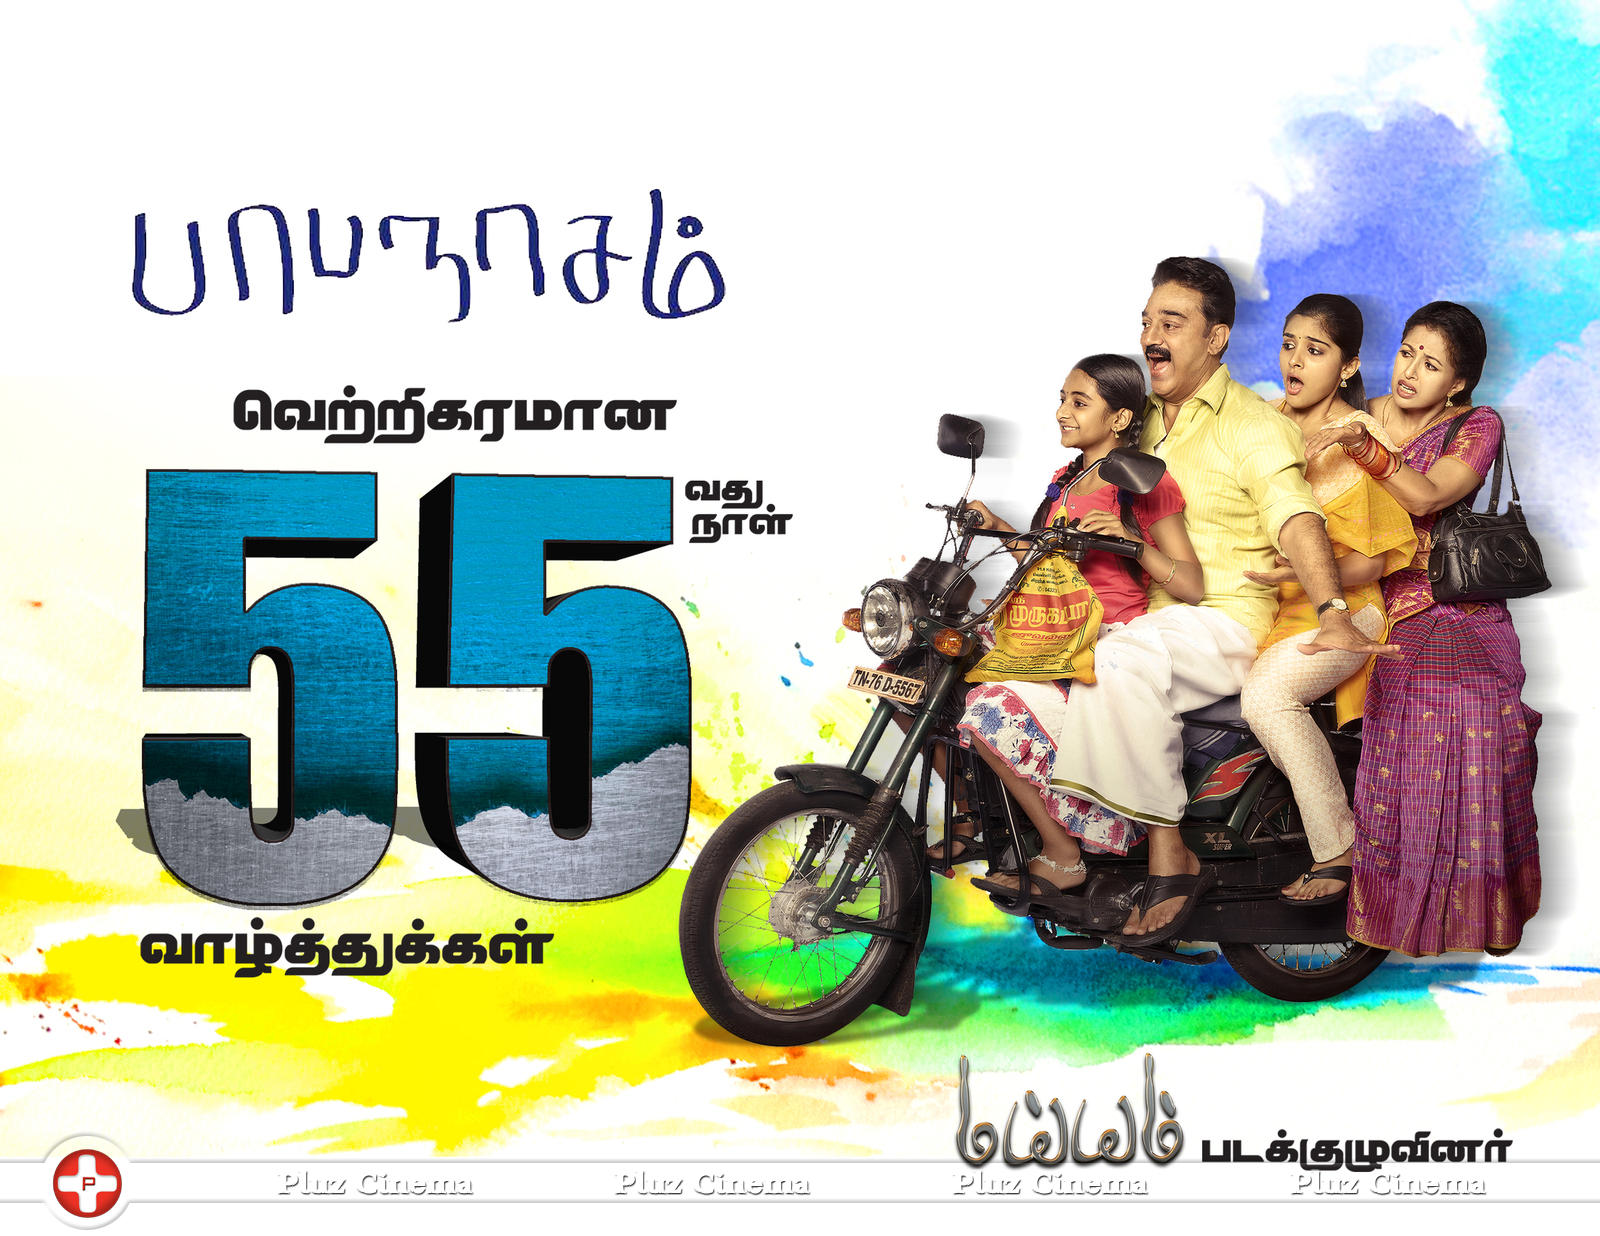 Maiem Team Wishing Papanasam for Completing 55 Days Poster | Picture 1105404